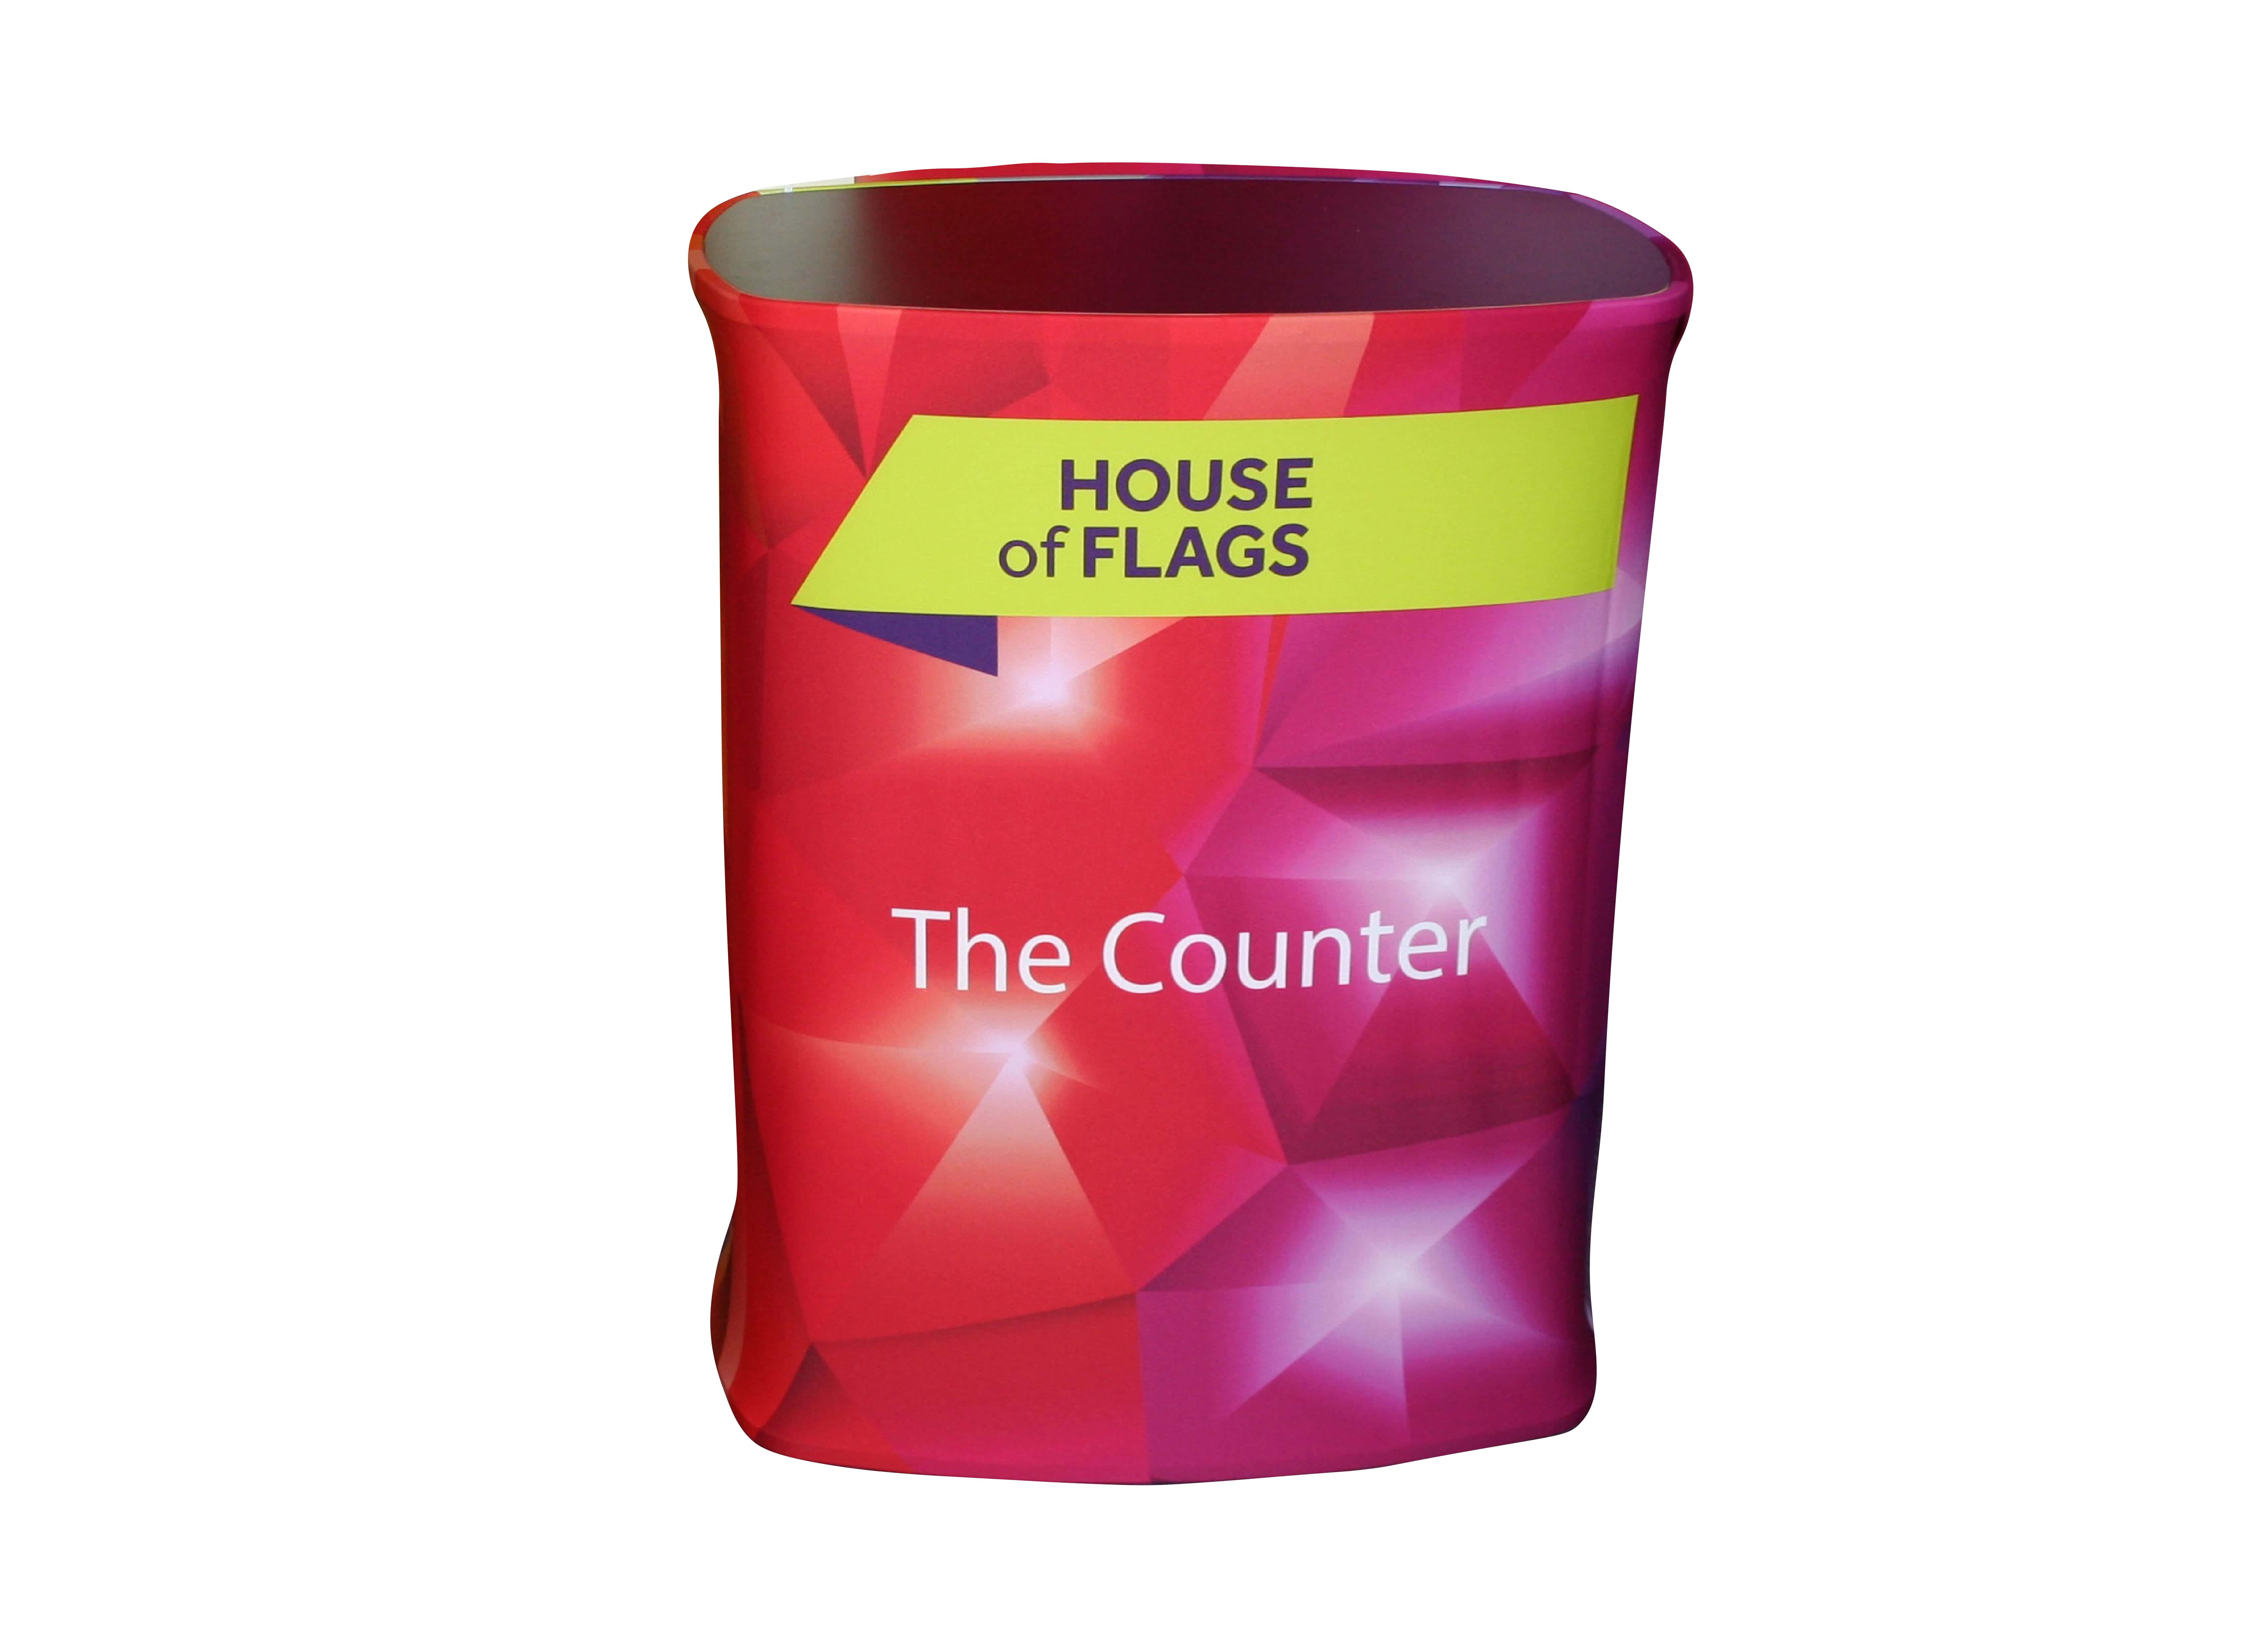 New product launch, House of Flags counter.